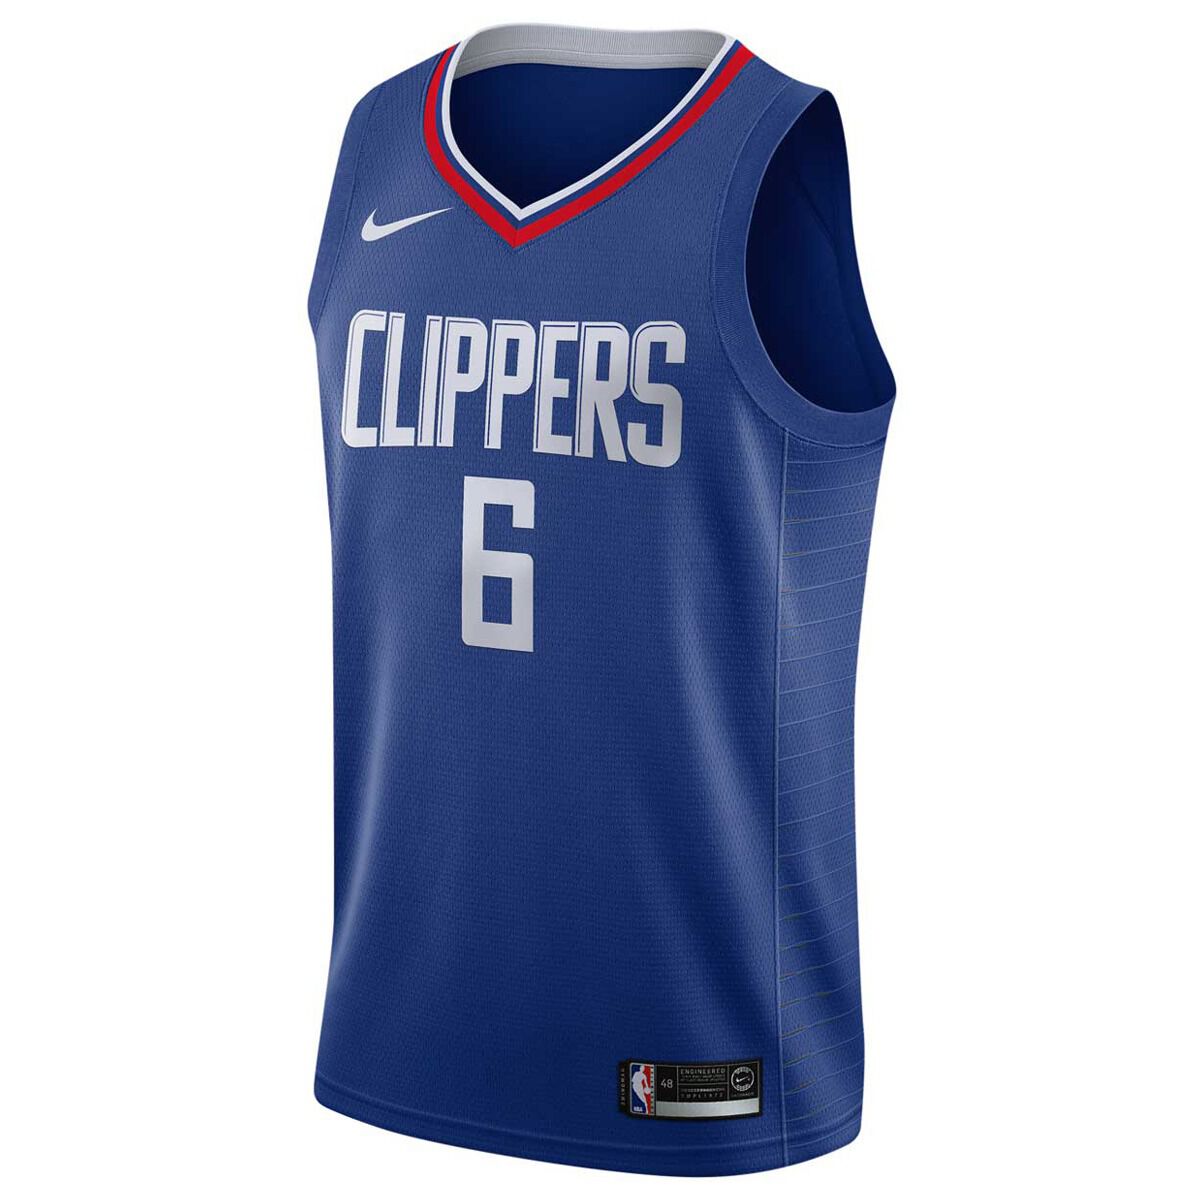 clippers blue jersey 2018